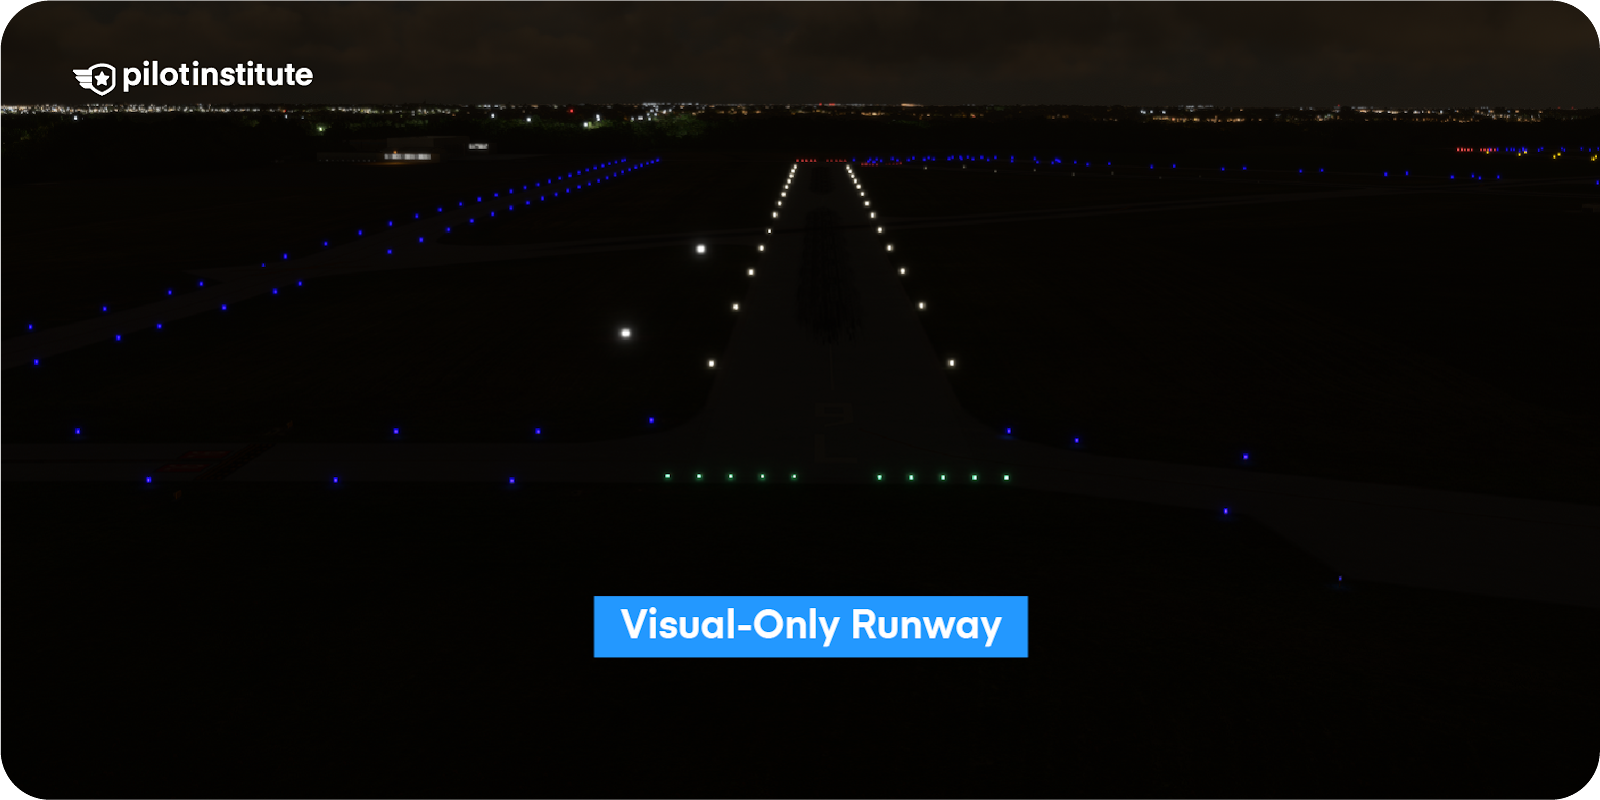 A Visual-only runway with all white runway edge lights.